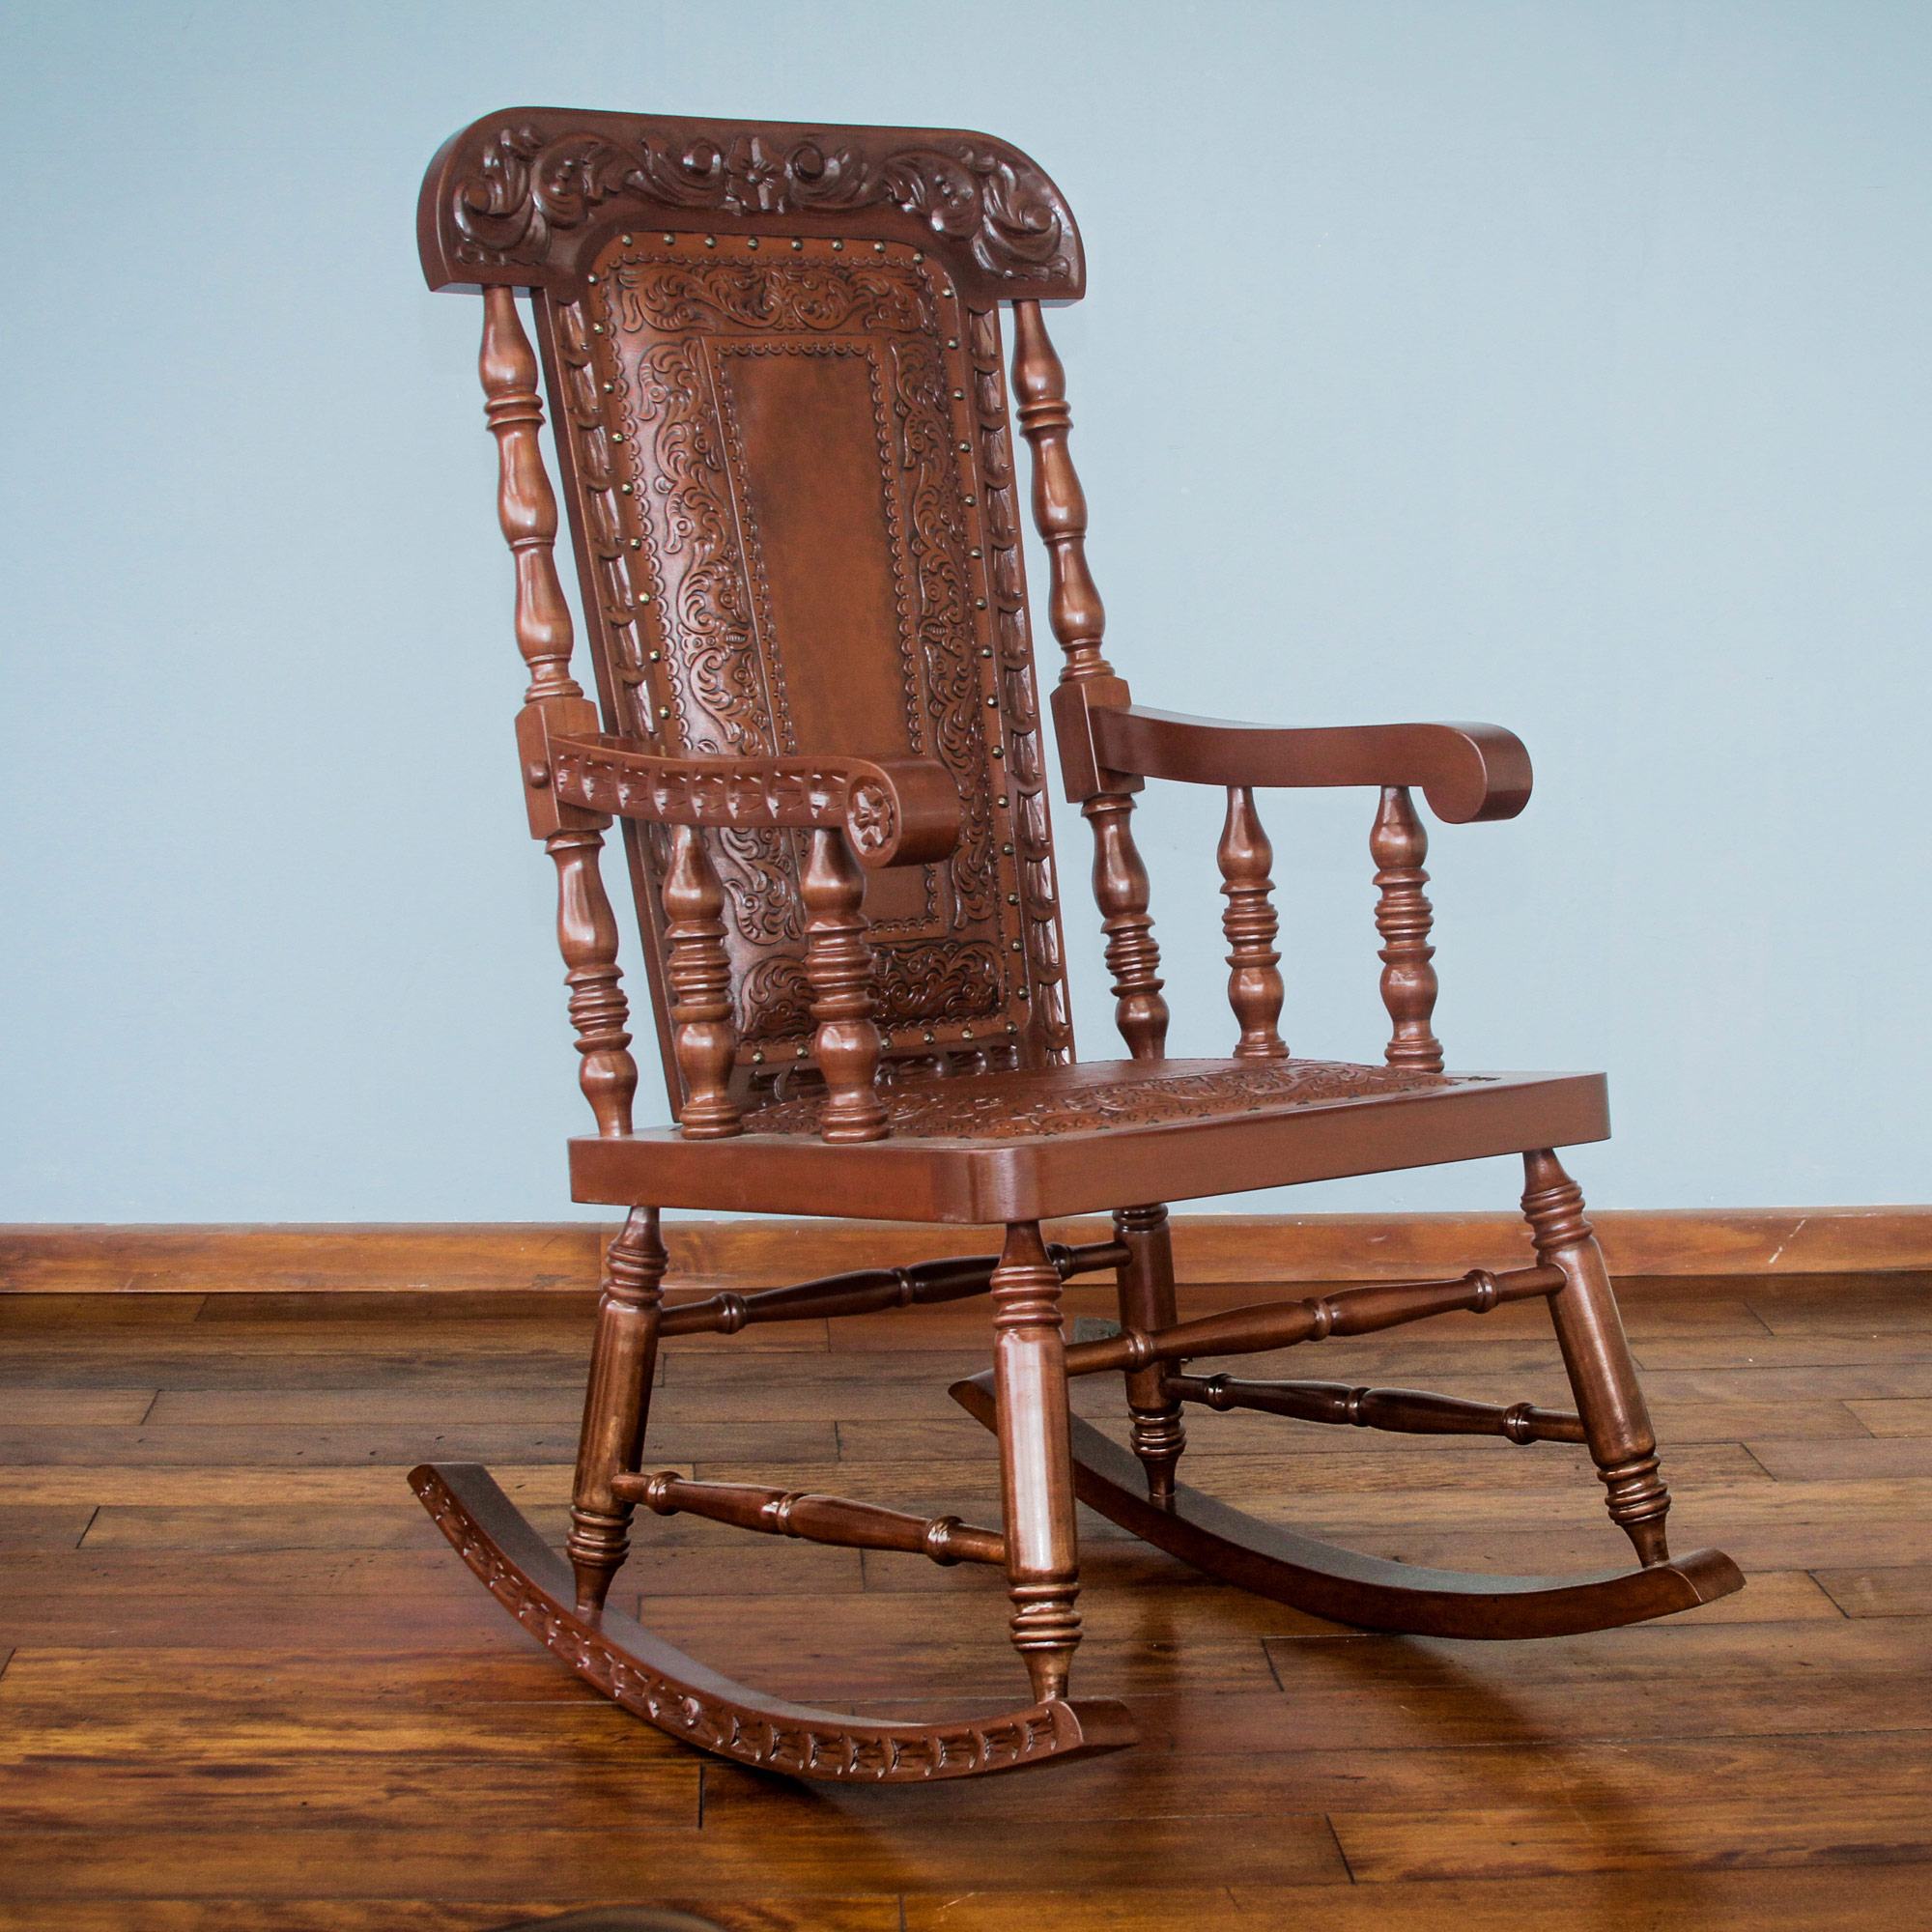 Traditional Cedar and leather rocking chair, 'Nobility' hand carved wood tooled embossed leather